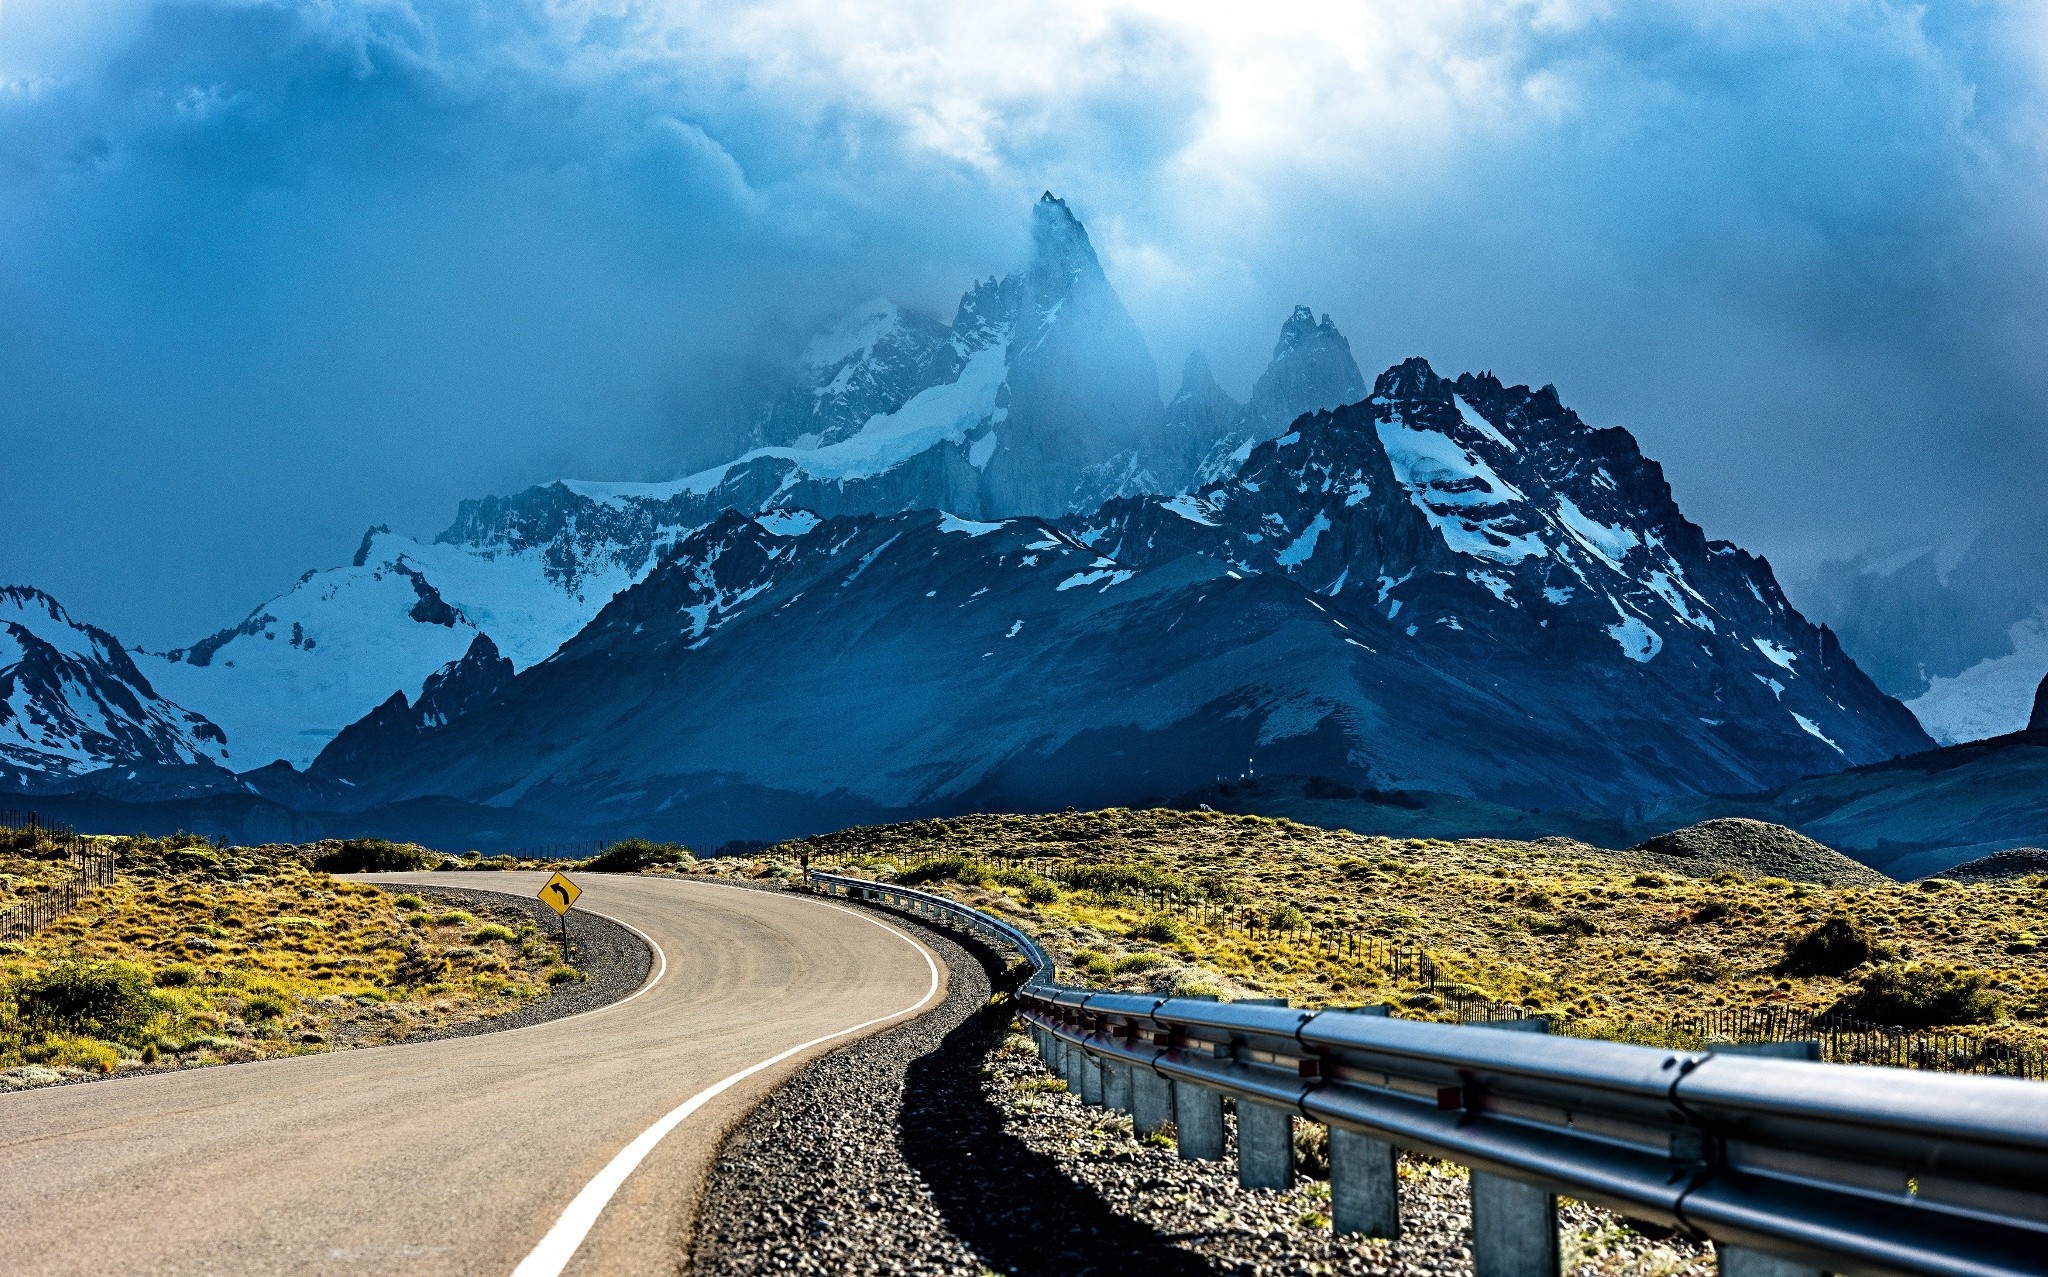 photography, Nature, Mountains, Snowy Peak, Road, Sunset, Clouds, Shrubs, Patagonia, Argentina, Landscape Wallpaper